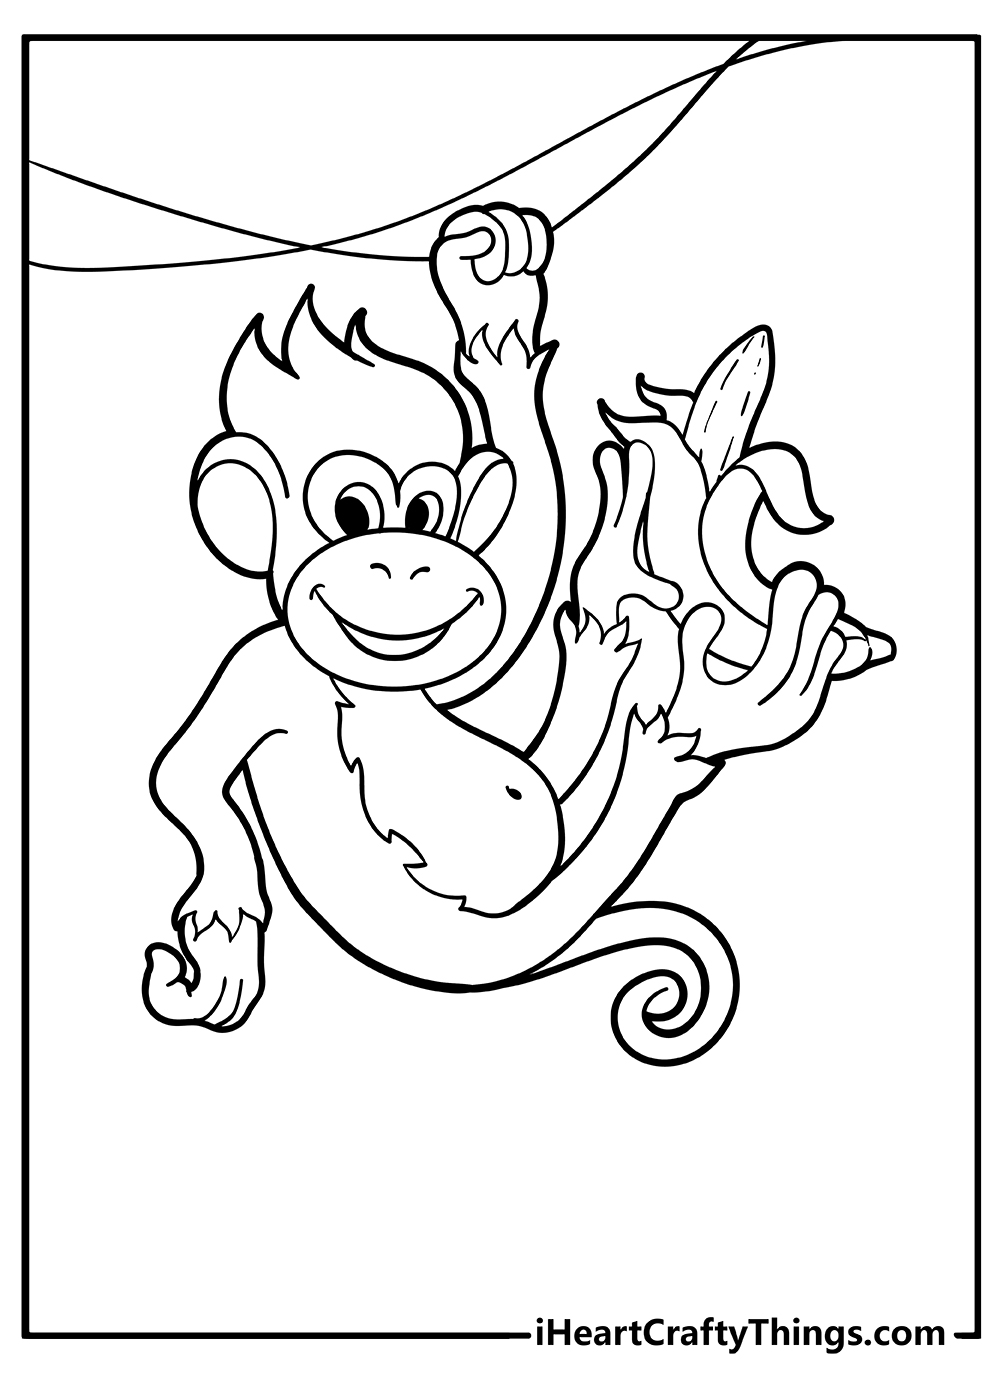 Printable Monkey Coloring Pages Updated 20